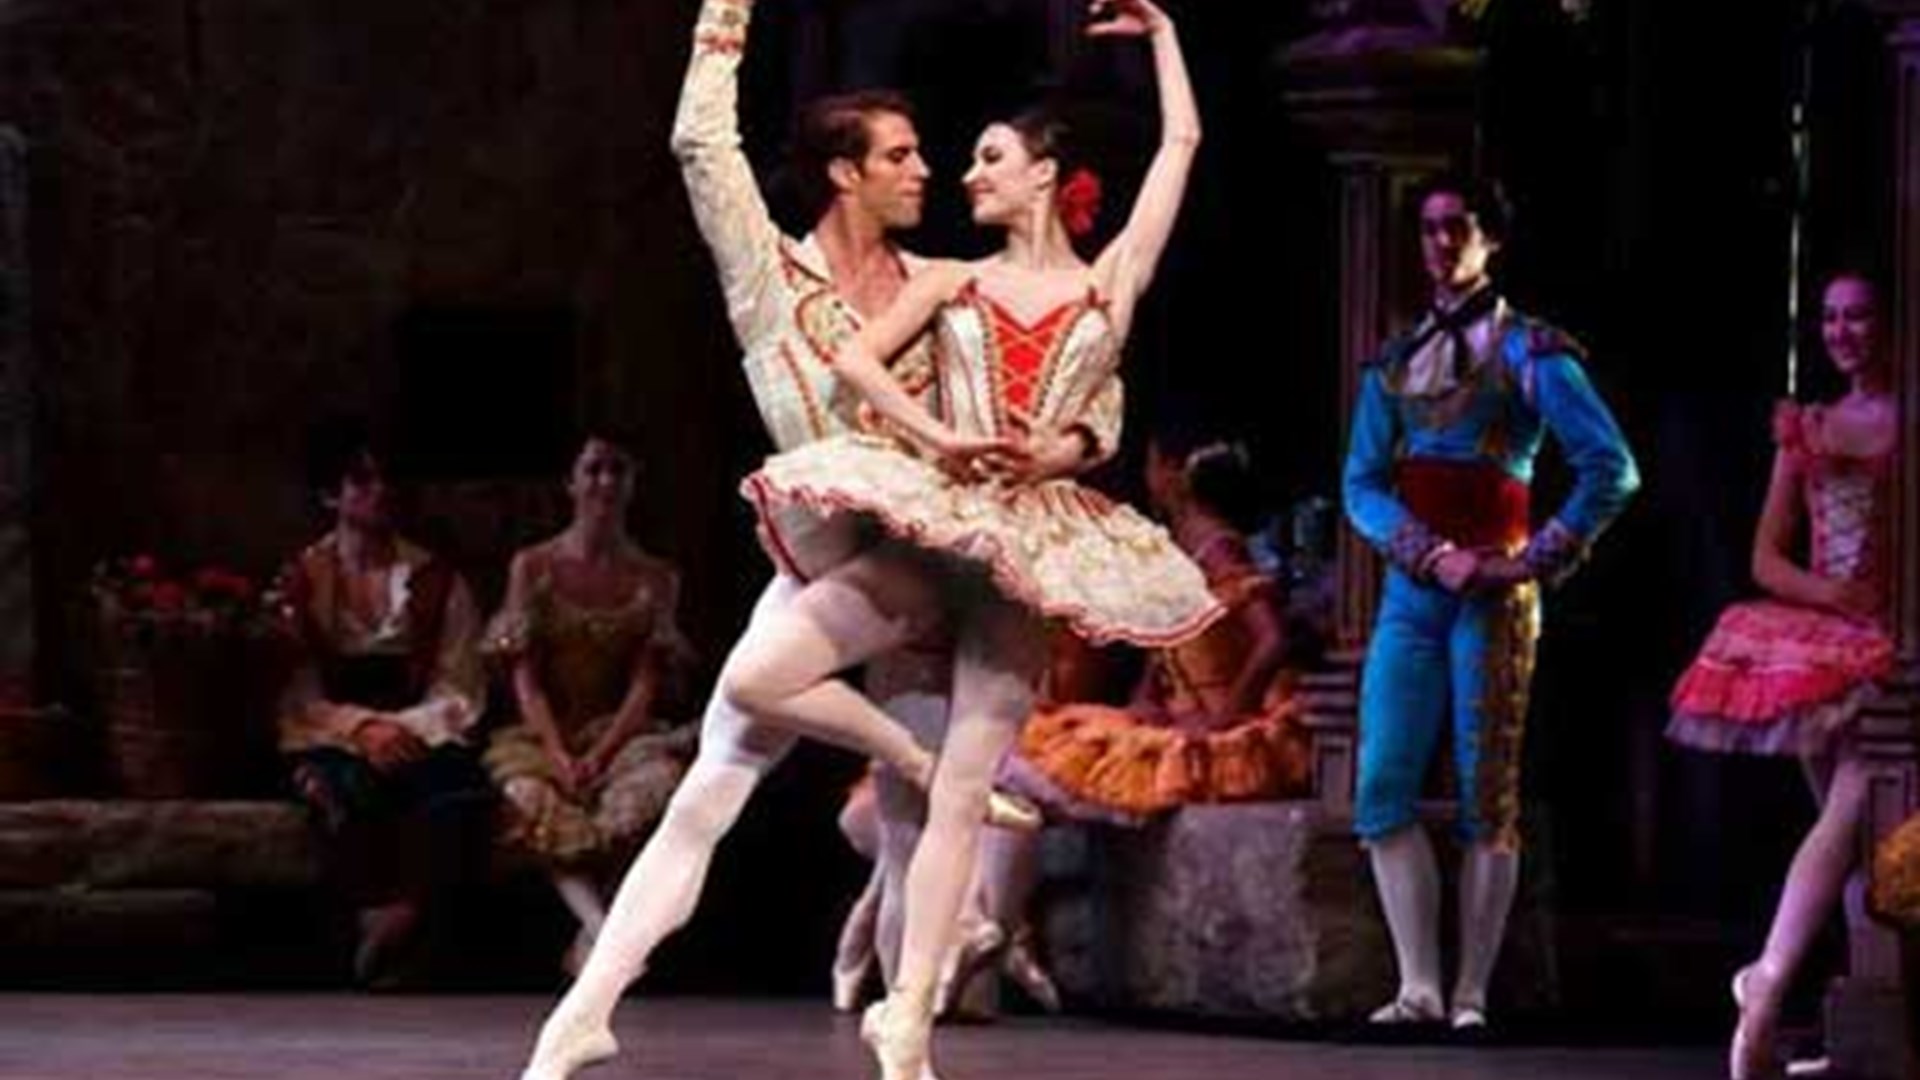 INSIDE LOOK: American Ballet Theatre's Don Quixote—A Student Experience